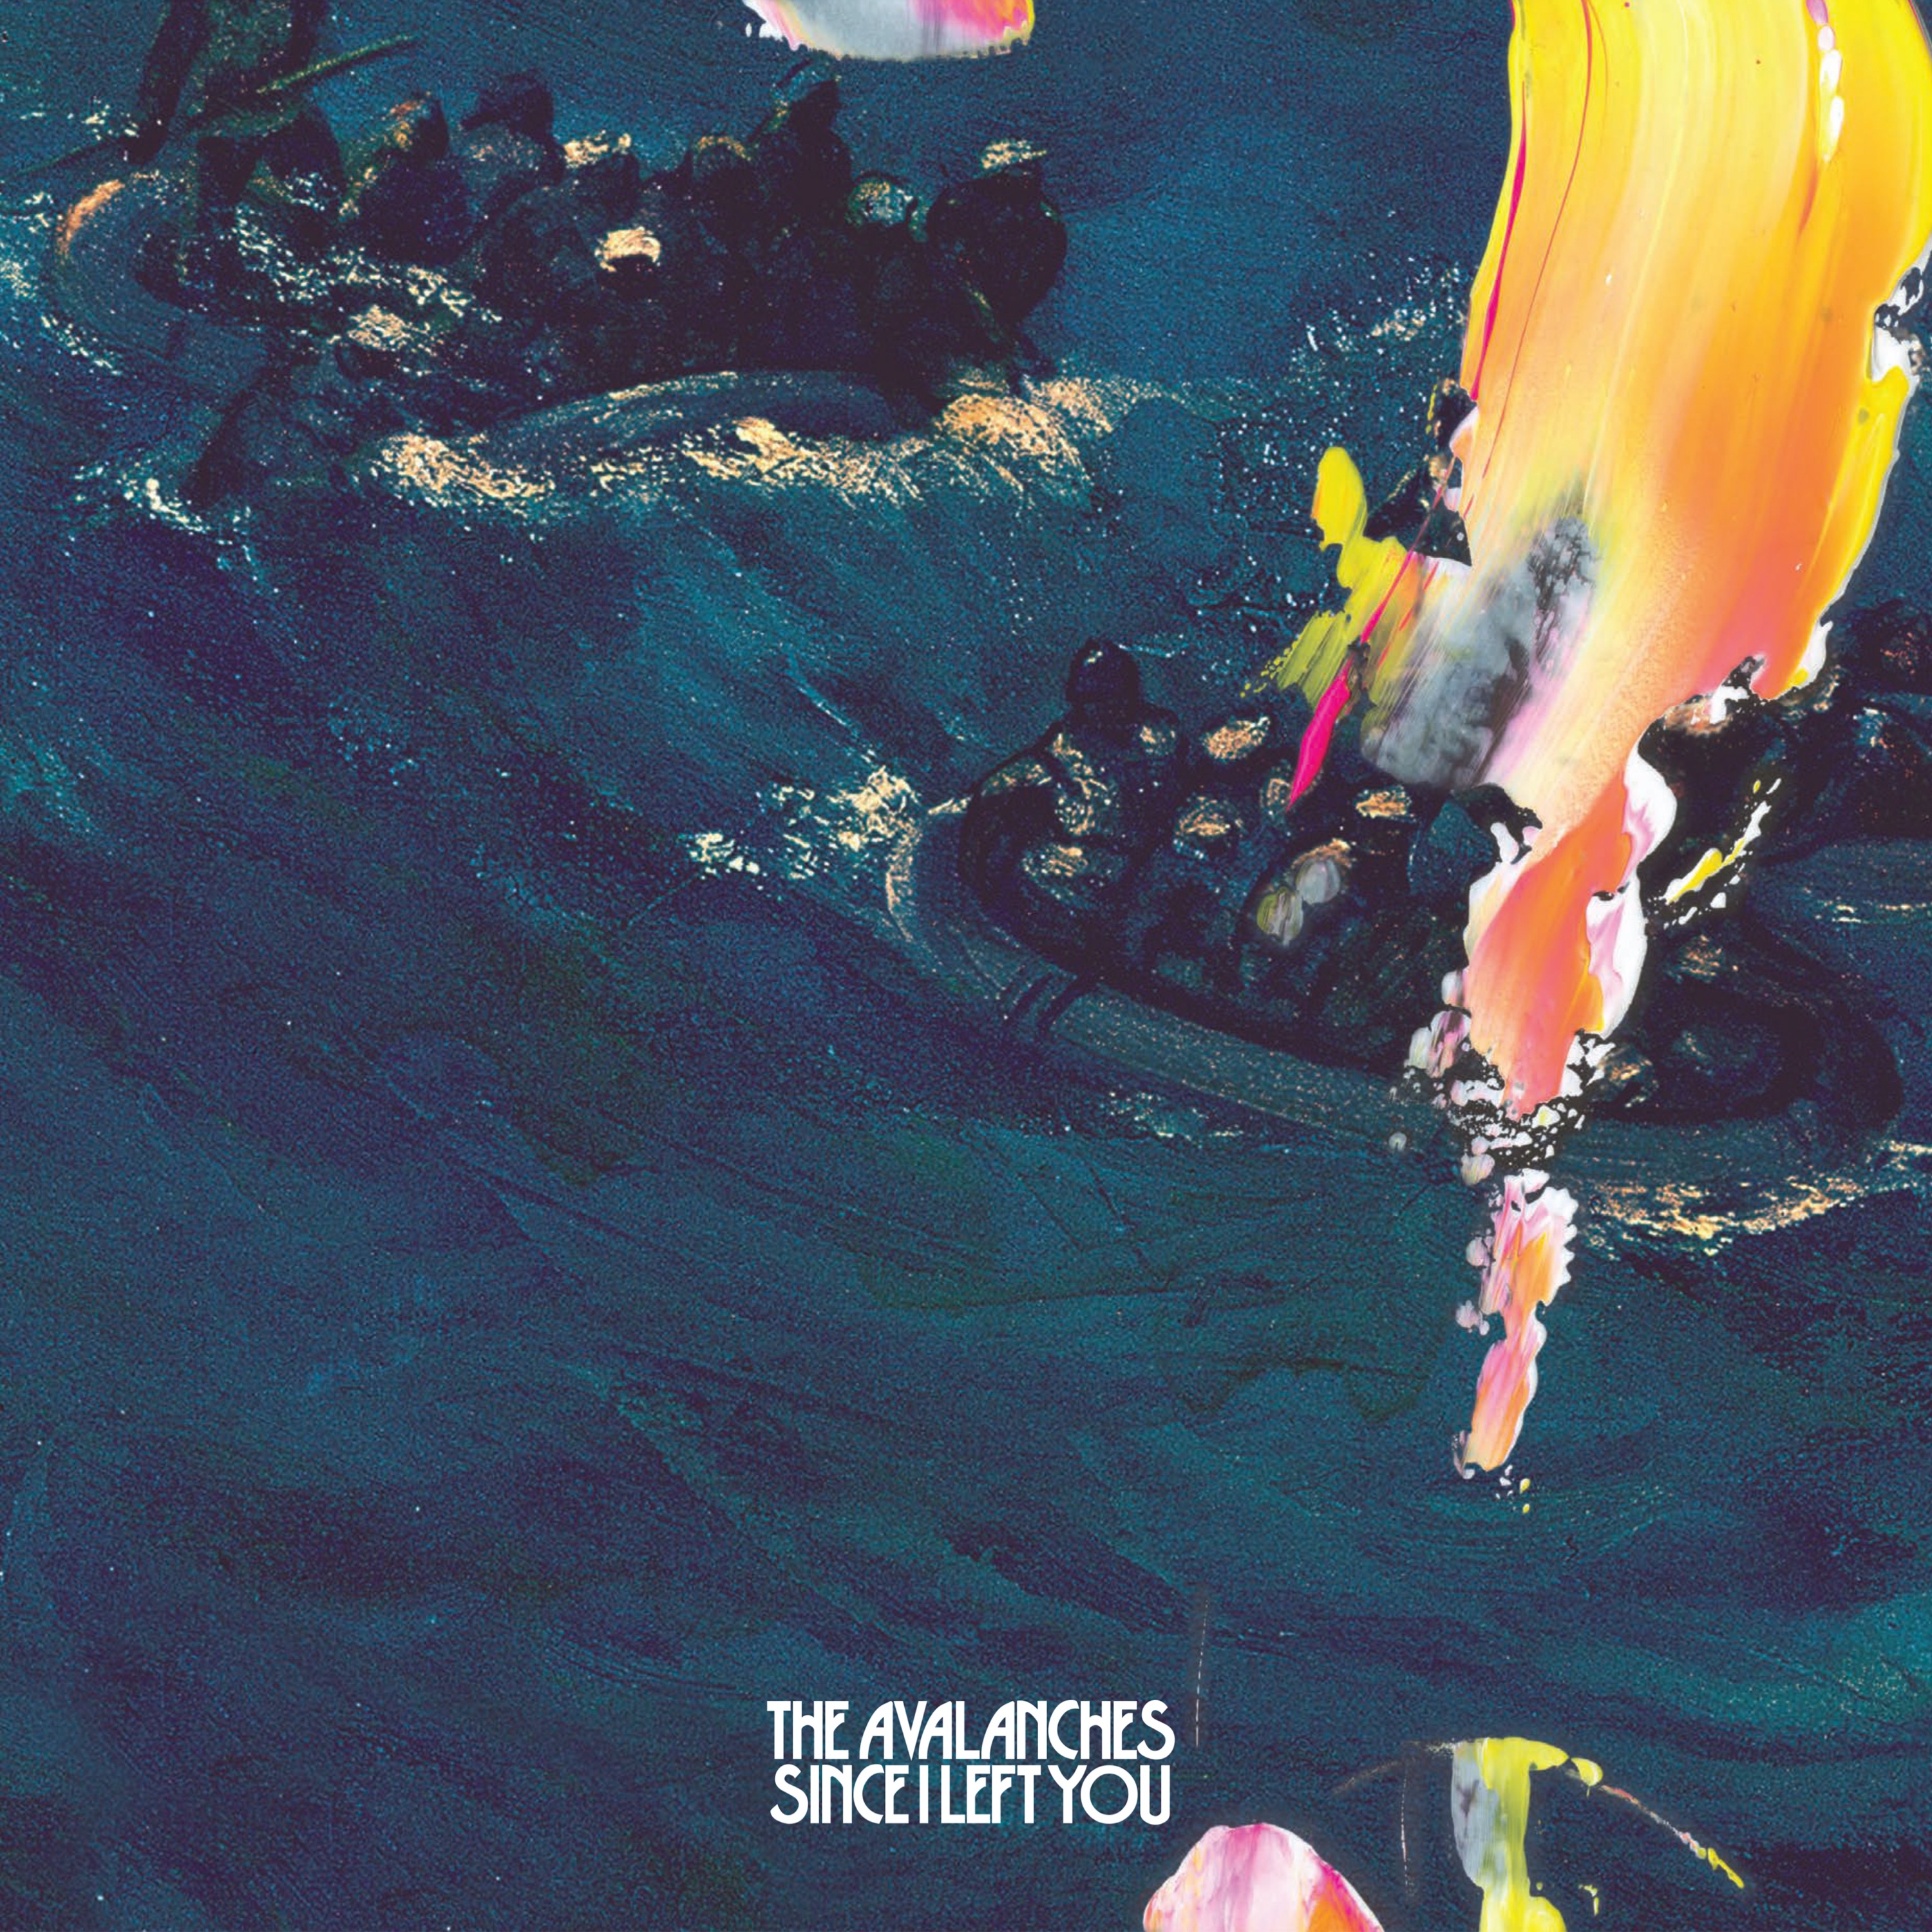 The Avalanches - Since I Left You (Deluxe Edition)